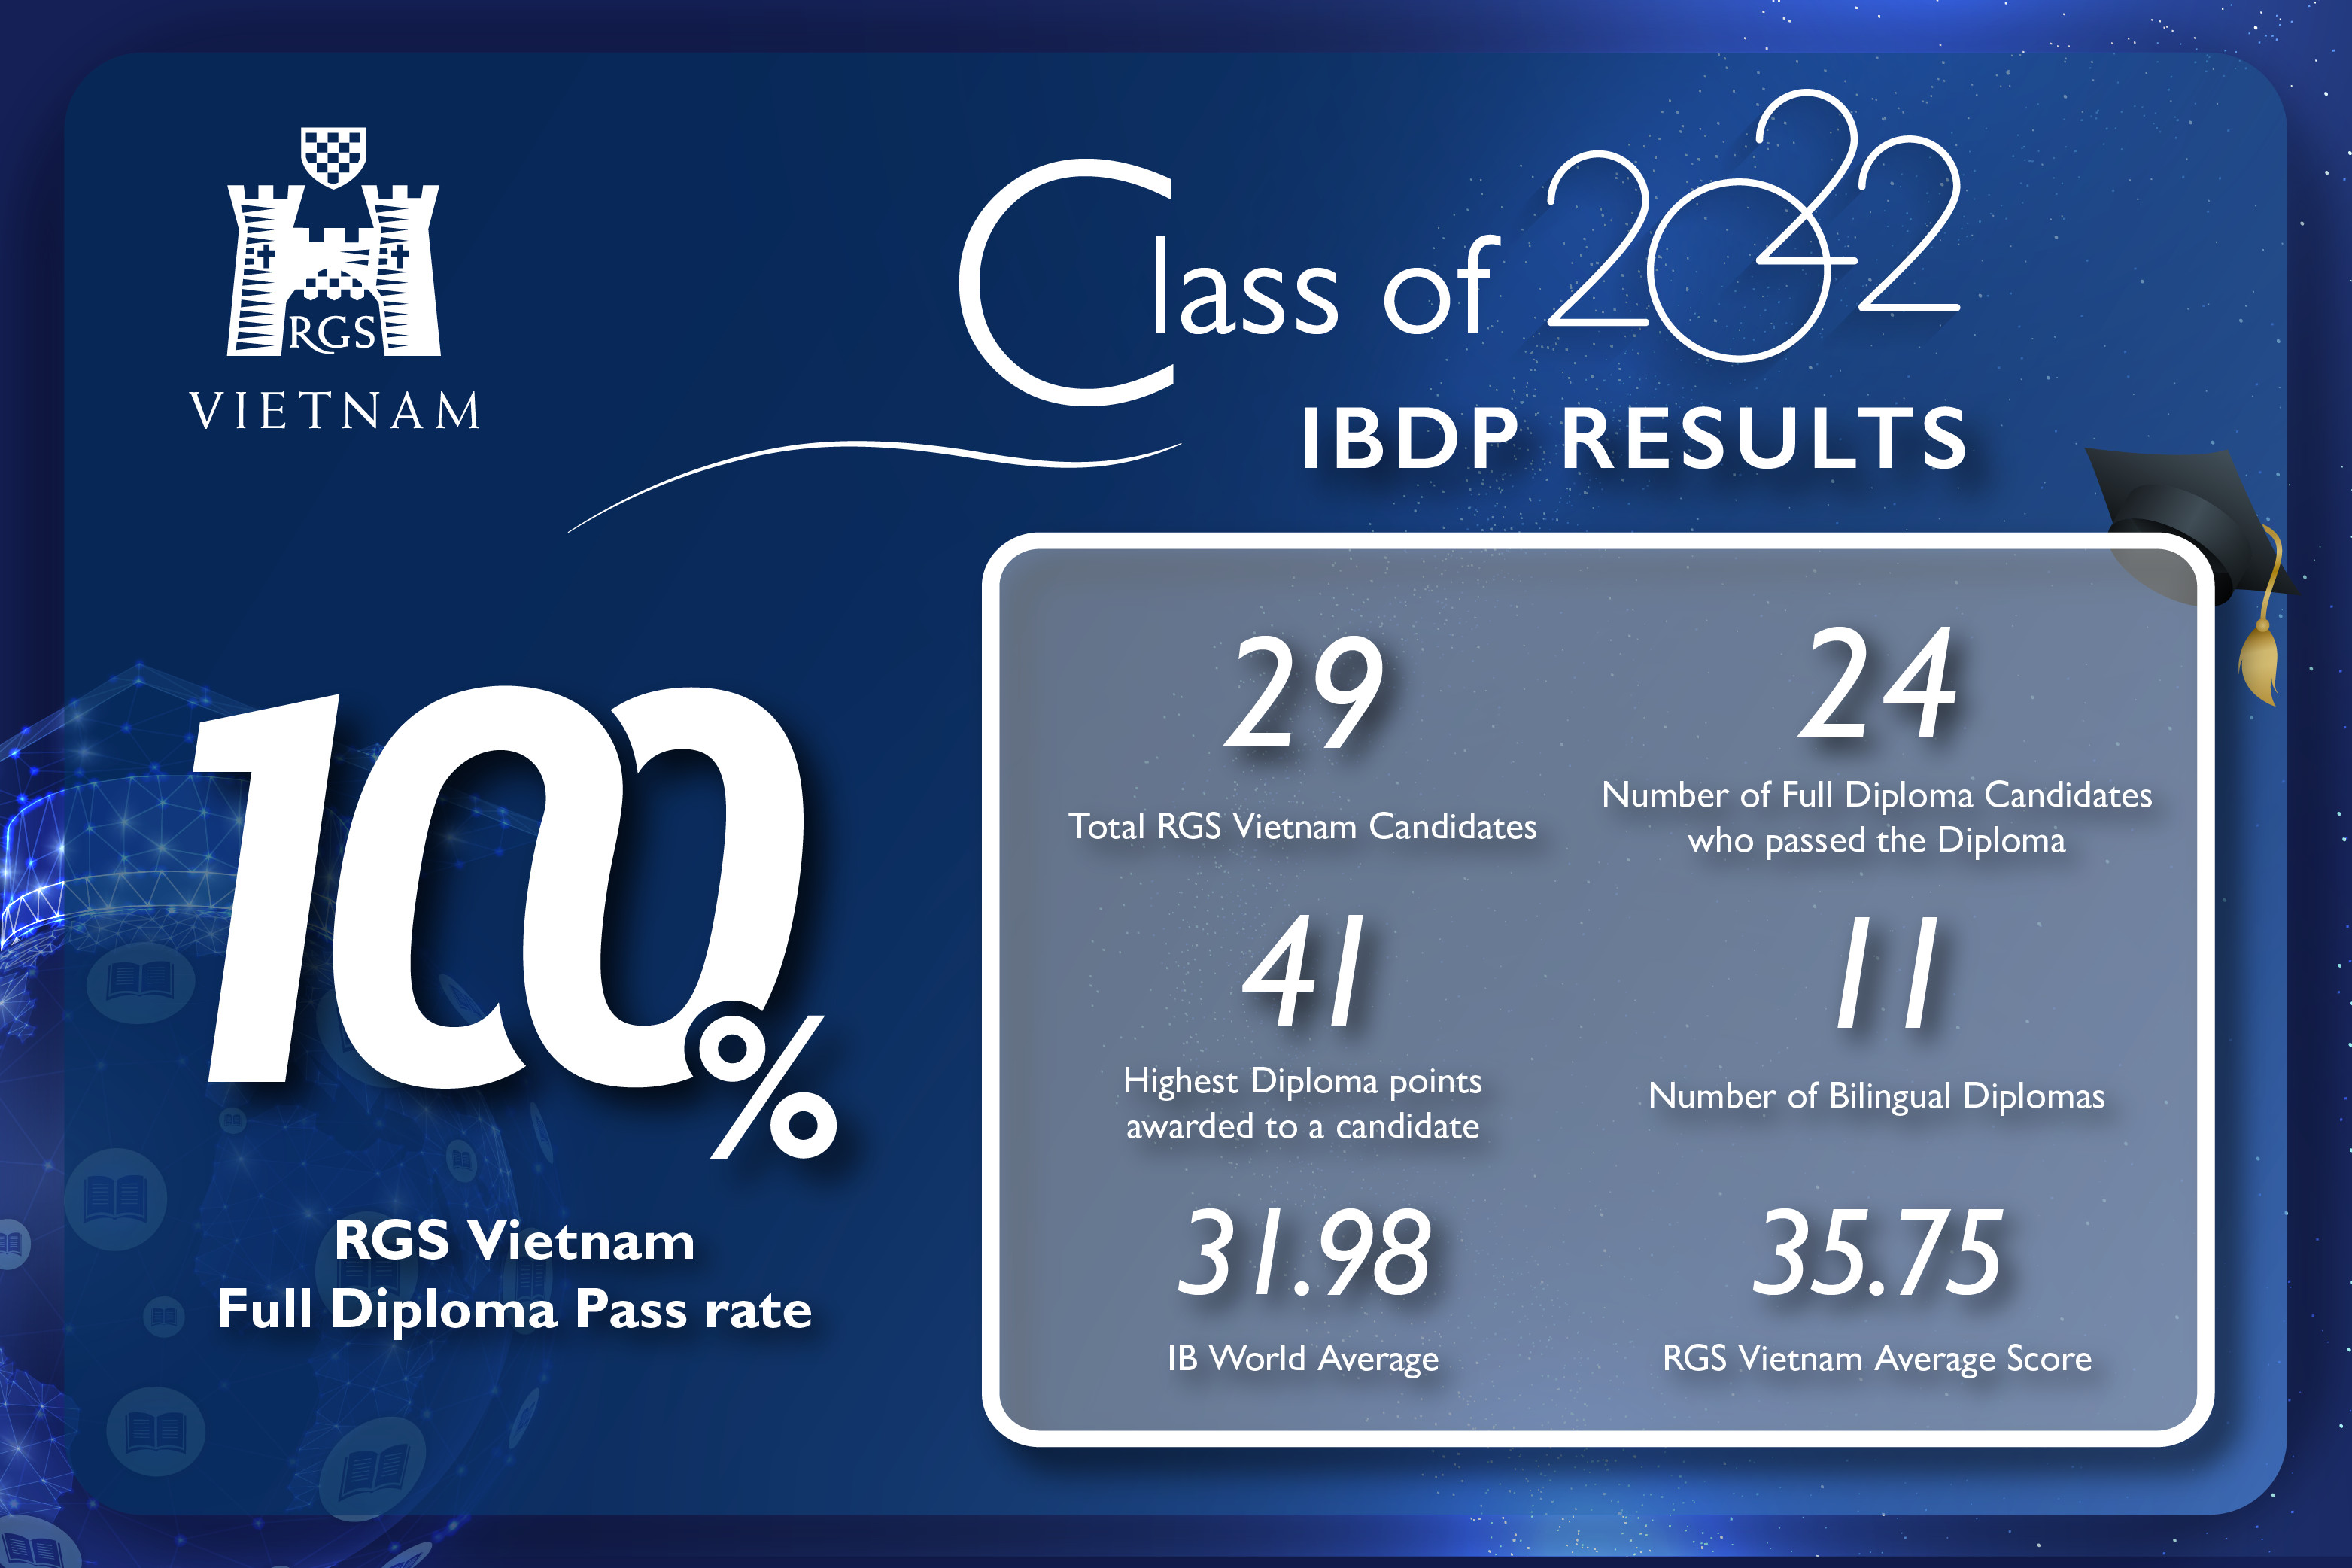 Class of 2022 IB DP Results